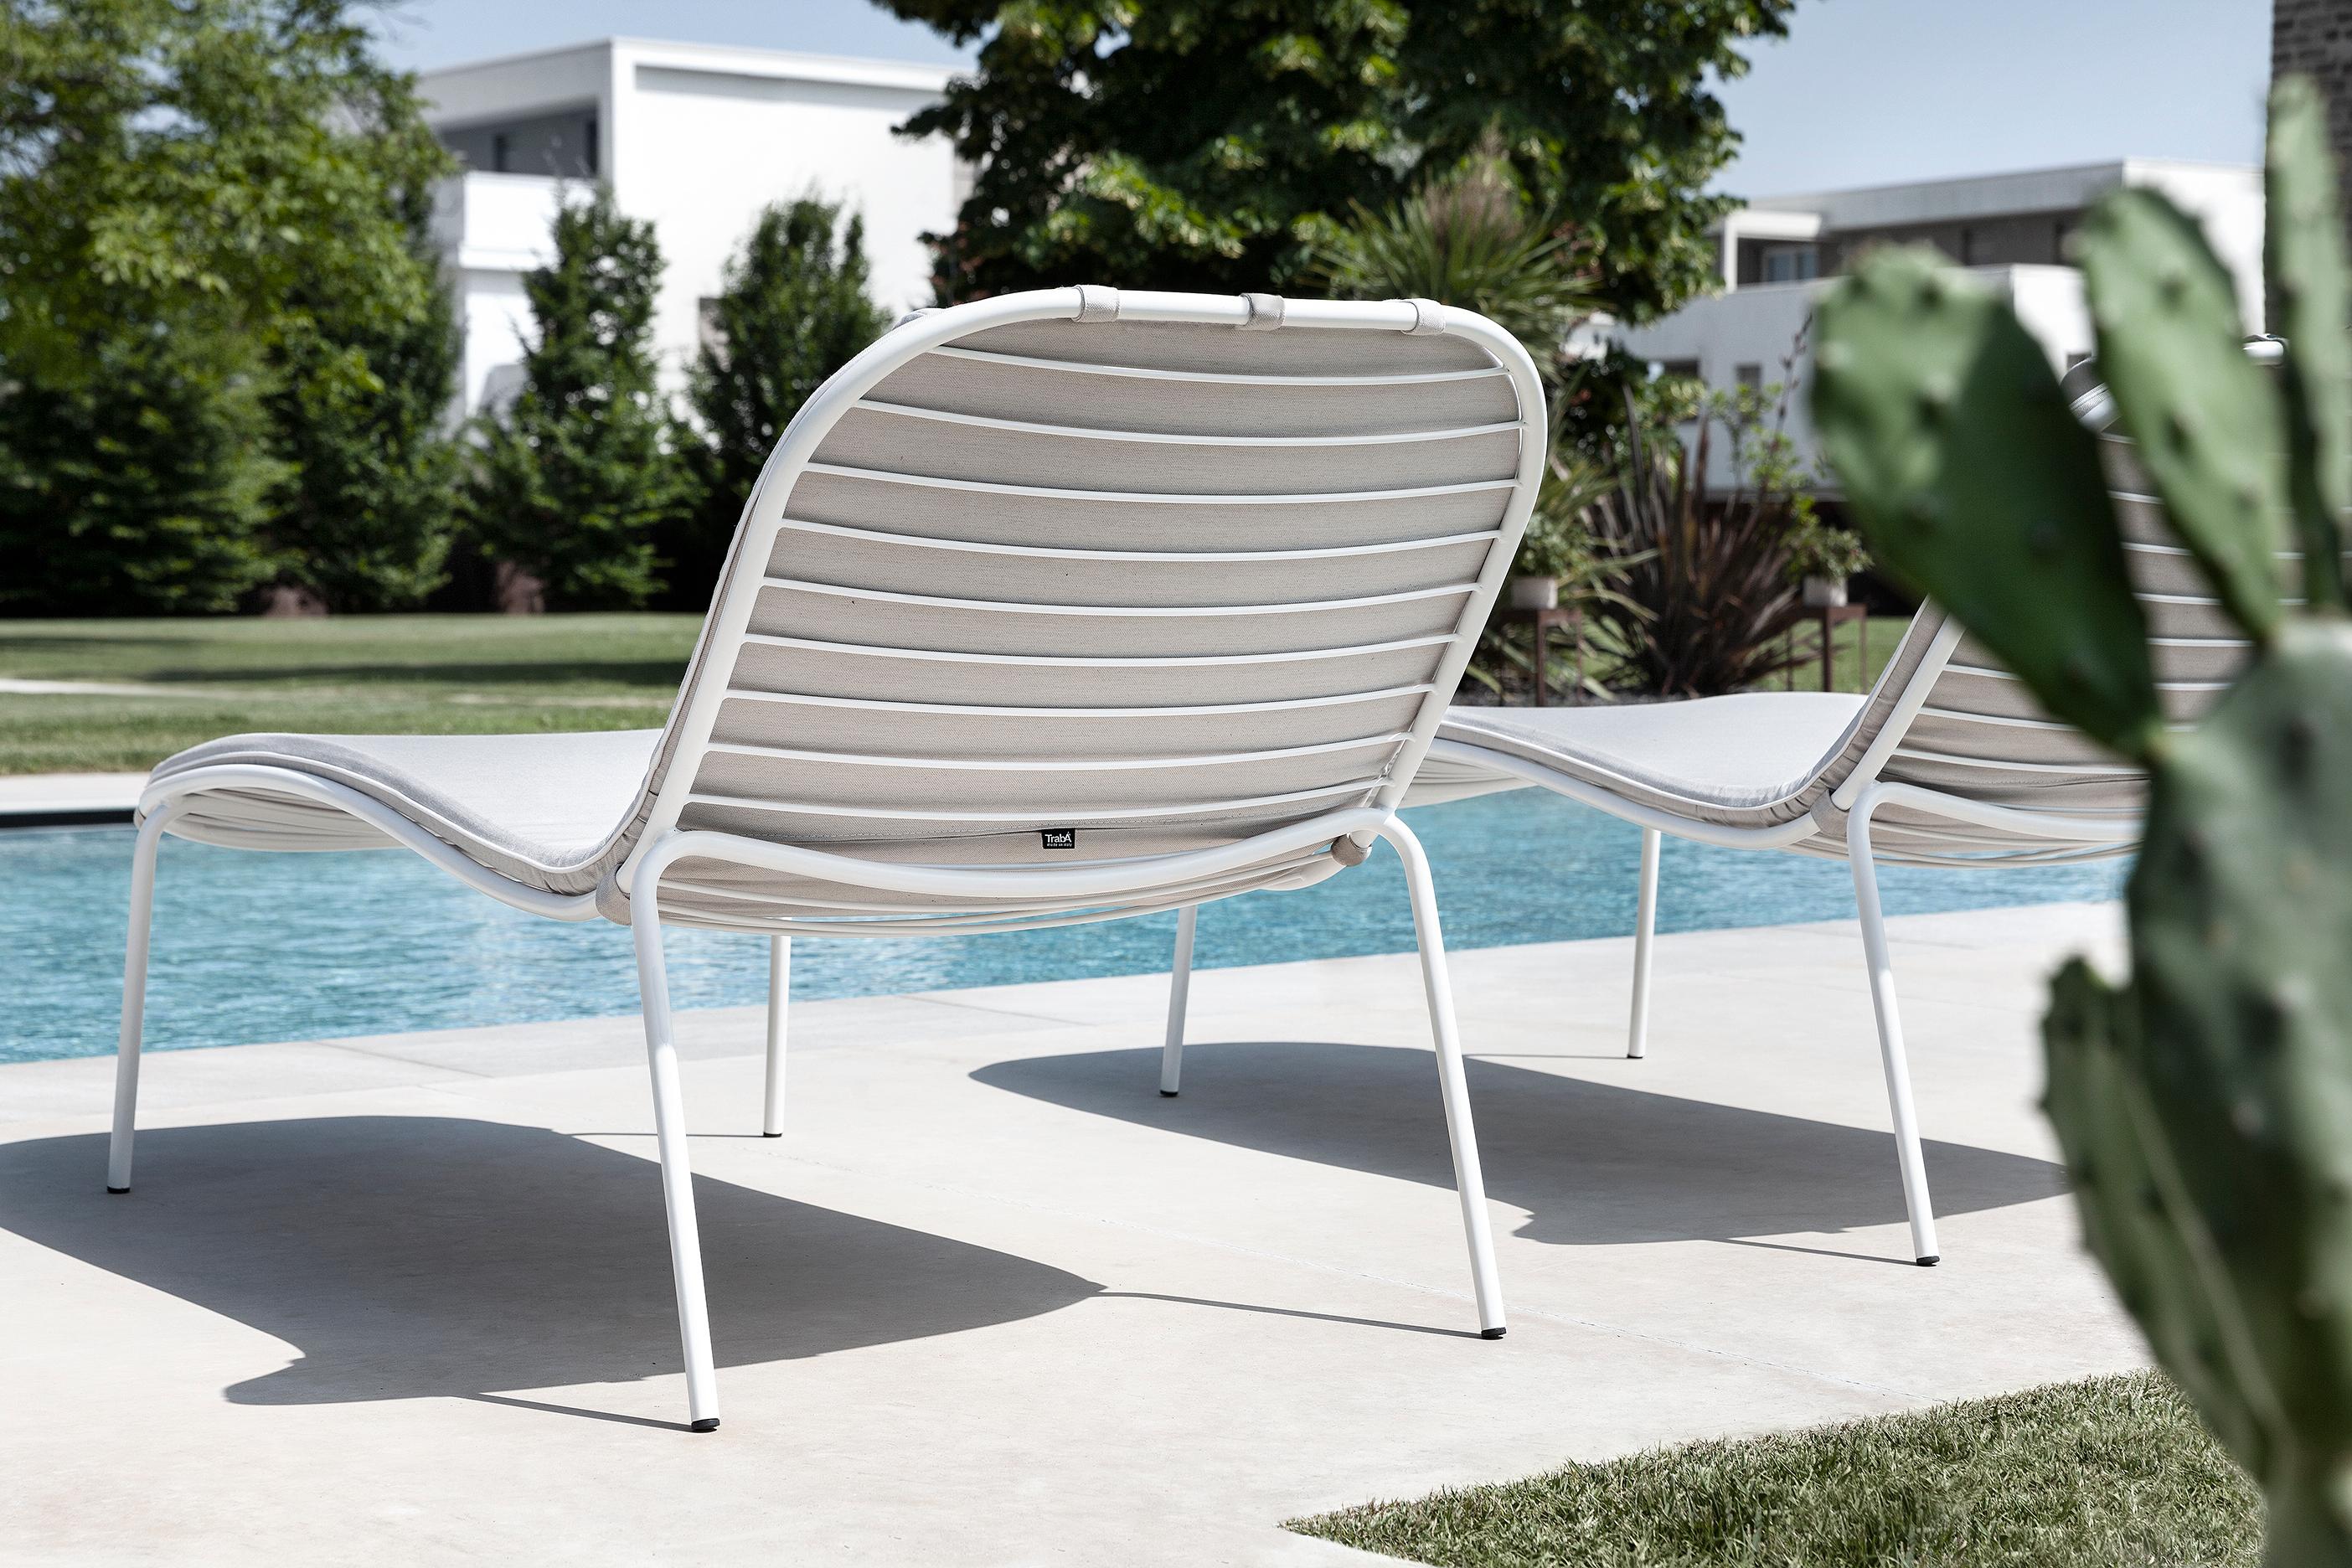 Sunshine Sunbed 0086/0087, Metal Colors Outoor, Spa, Relax, Swiming POOL, Hotel  For Sale 2